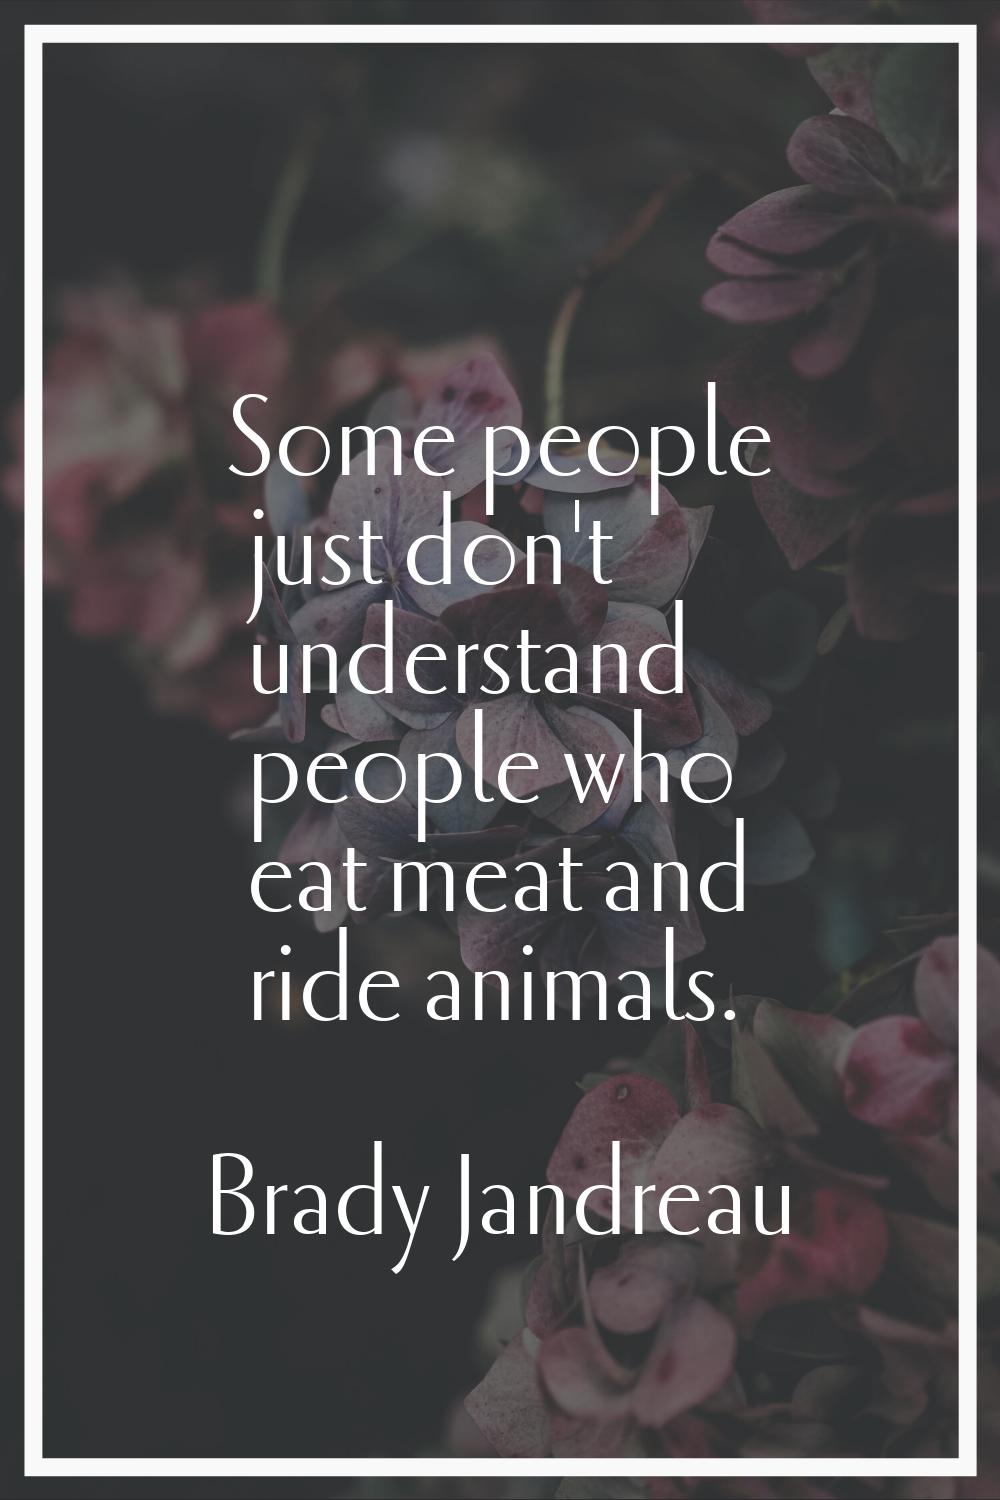 Some people just don't understand people who eat meat and ride animals.